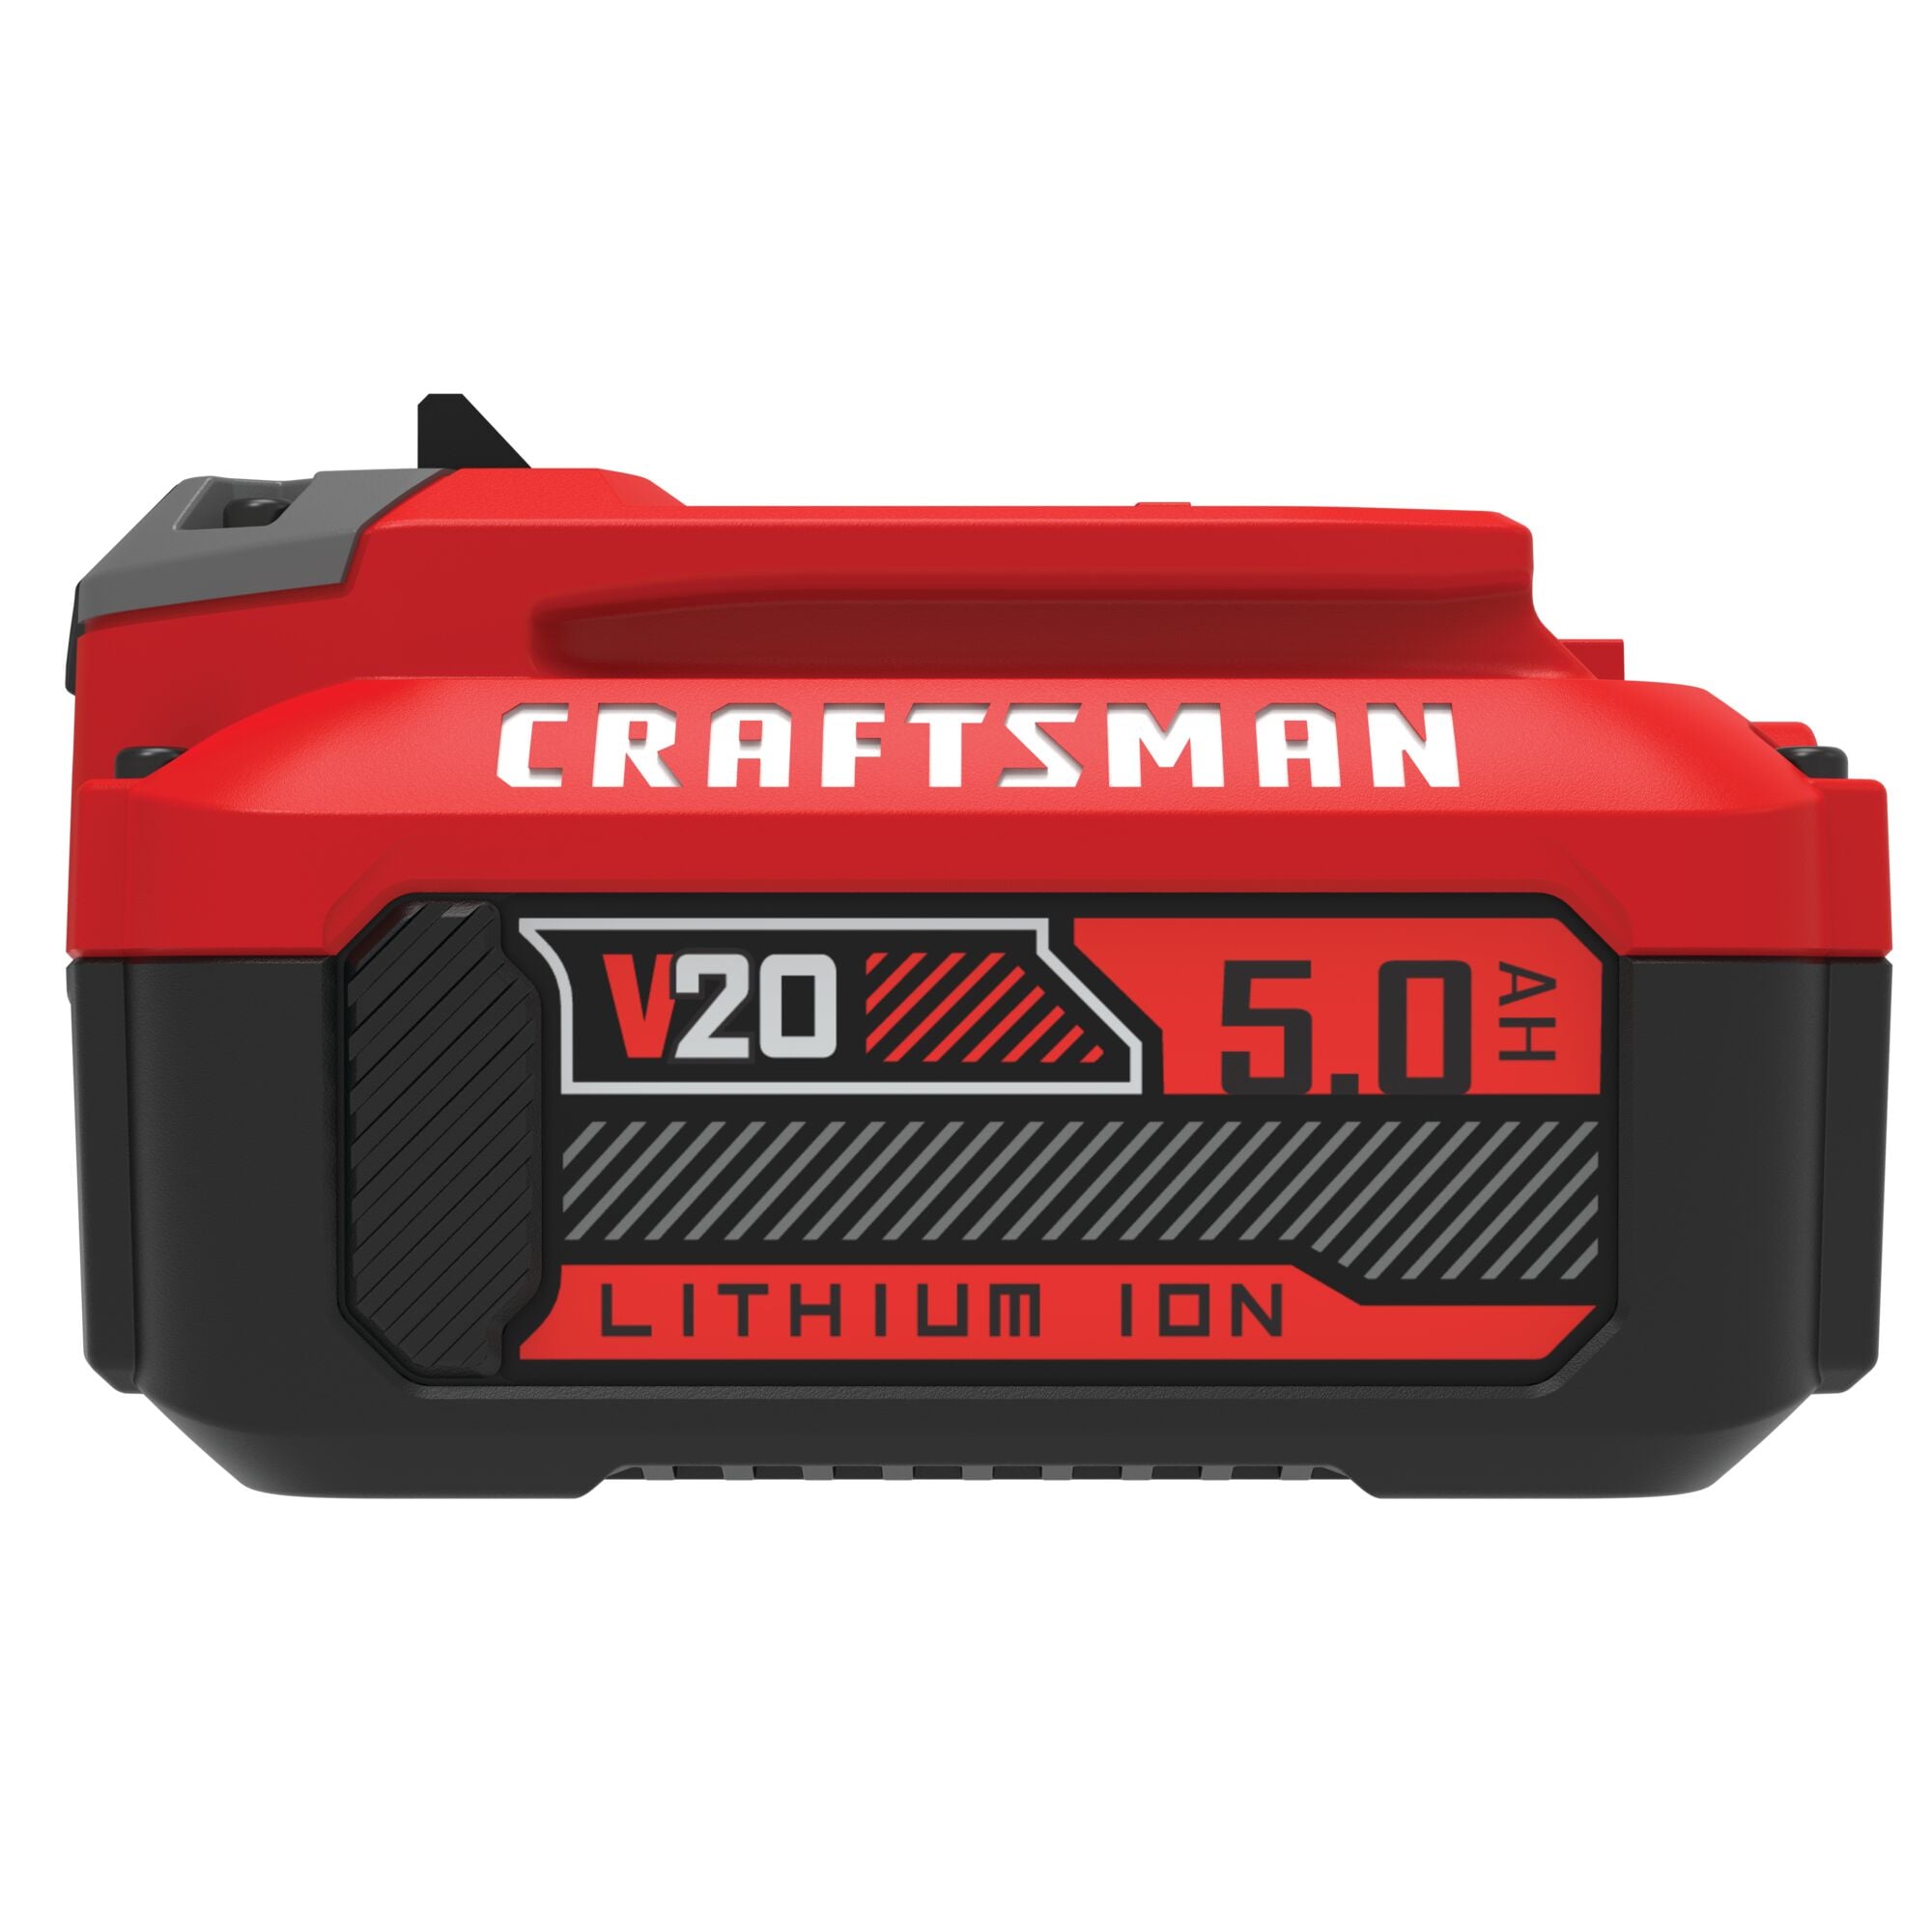 CRAFTSMAN V20 20 5 Amp-Hour; Lithium-ion Battery in the Power